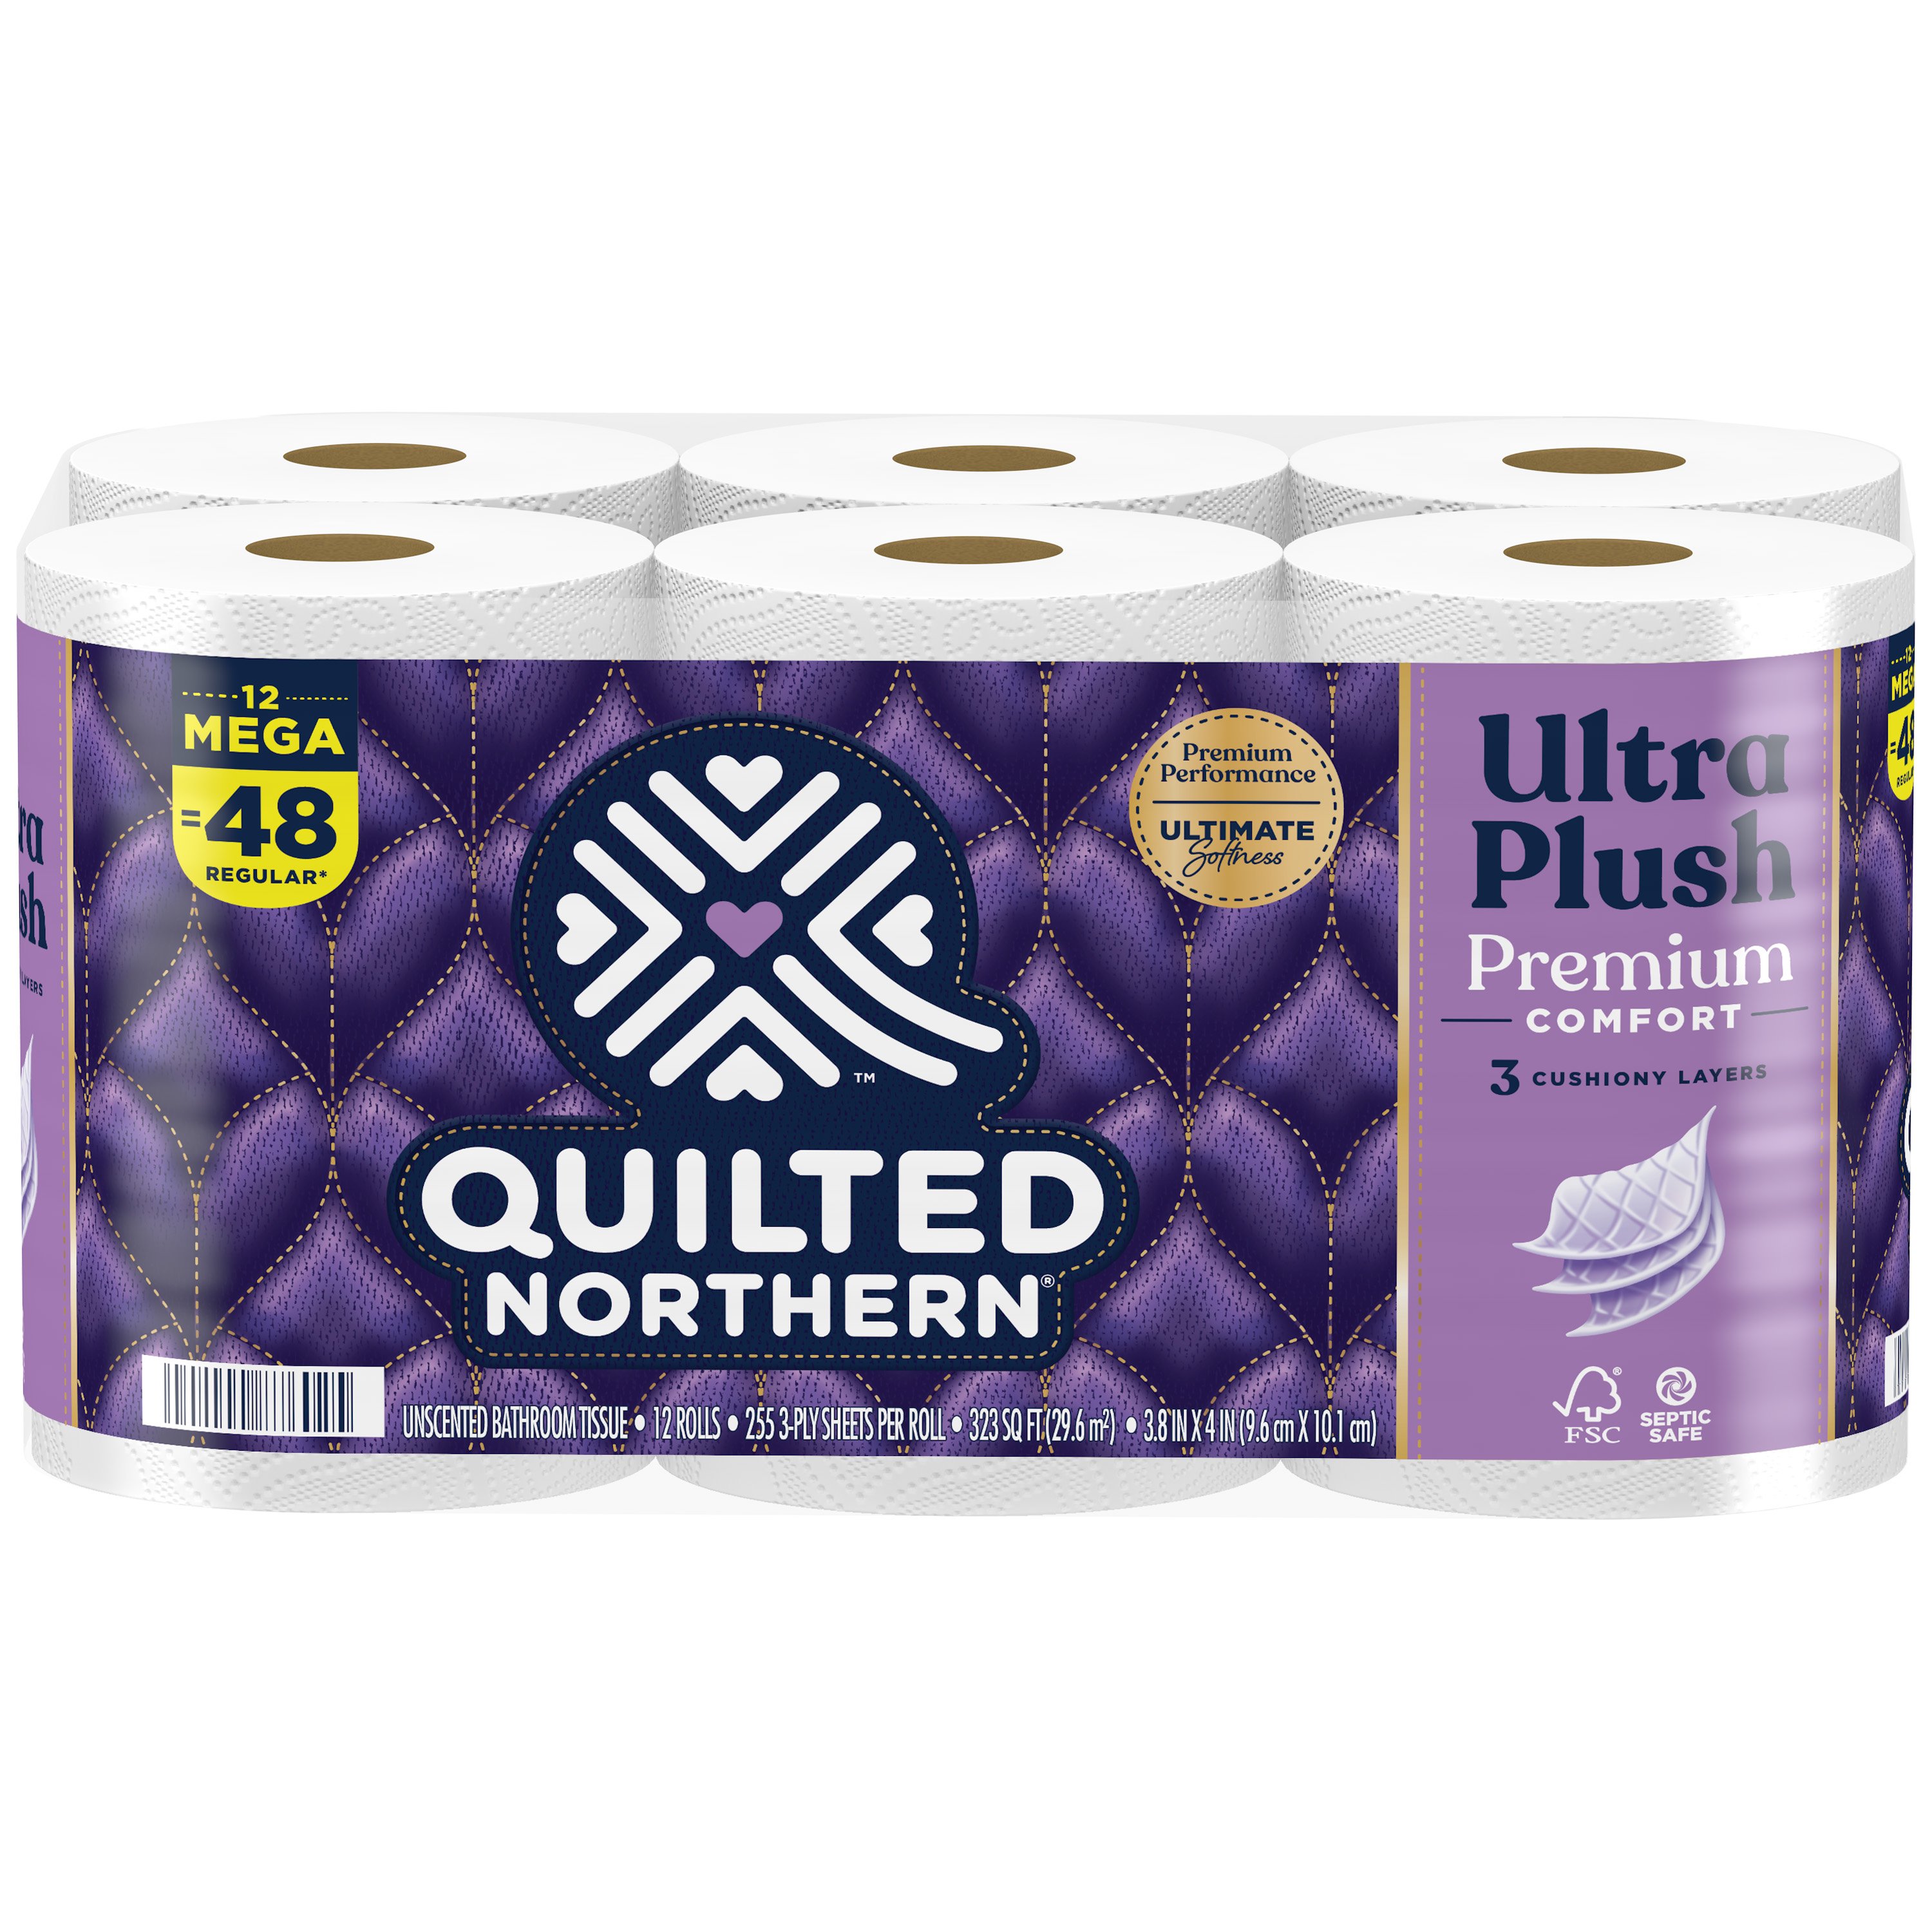 Quilted Northern Ultra Plush Toilet Paper - Shop Toilet Paper at H-E-B